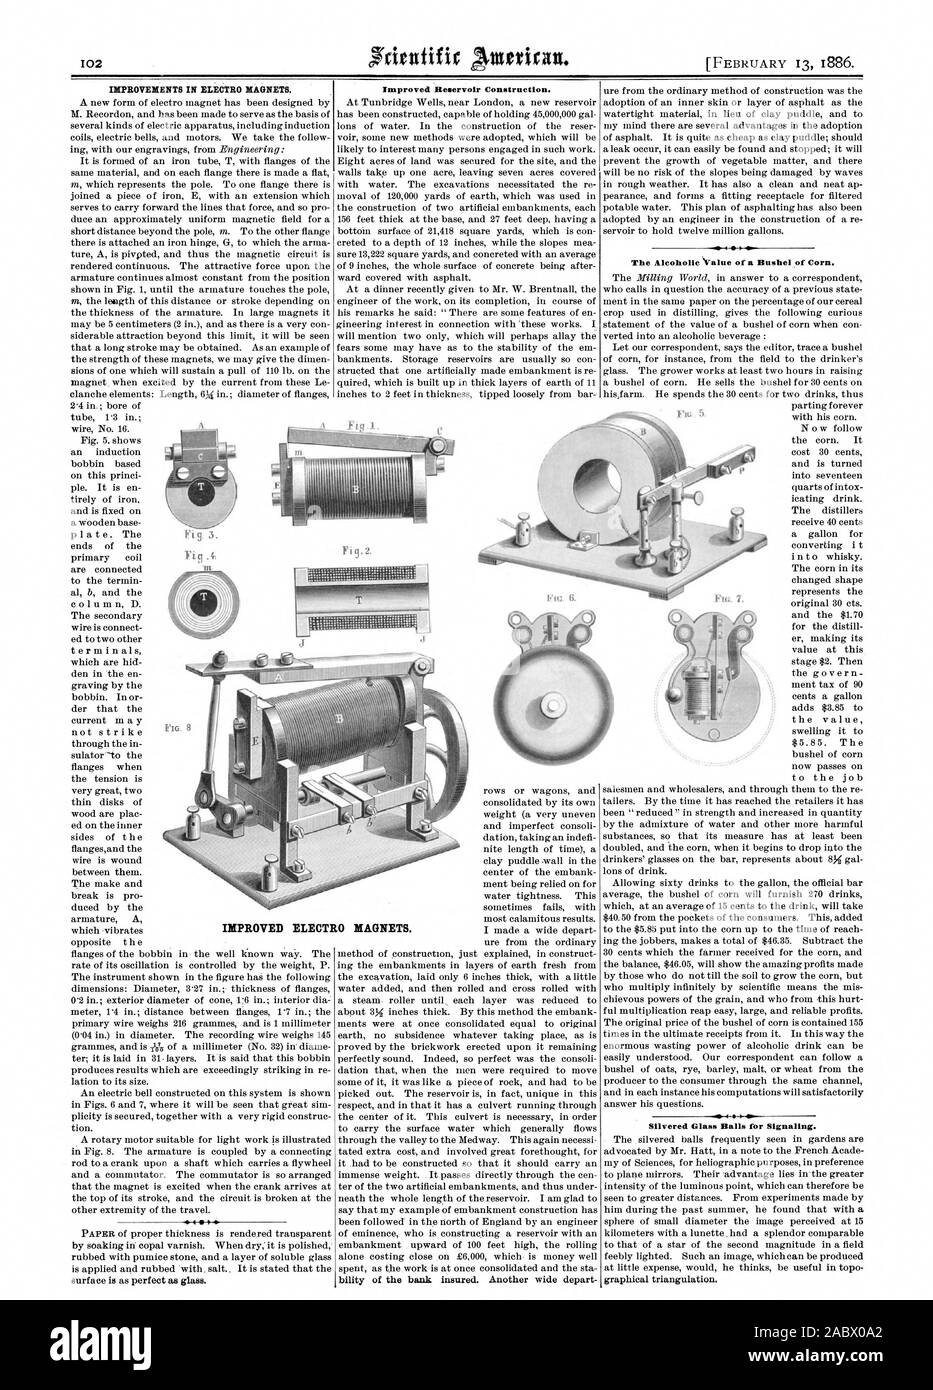 IMPROVEMENTS IN ELEOTRO MAGNETS. Improved Reservoir Construction. Silvered Glass Balls for Signaling. IMPROVED ELECTRO MAGNETS., scientific american, 1886-02-13 Stock Photo